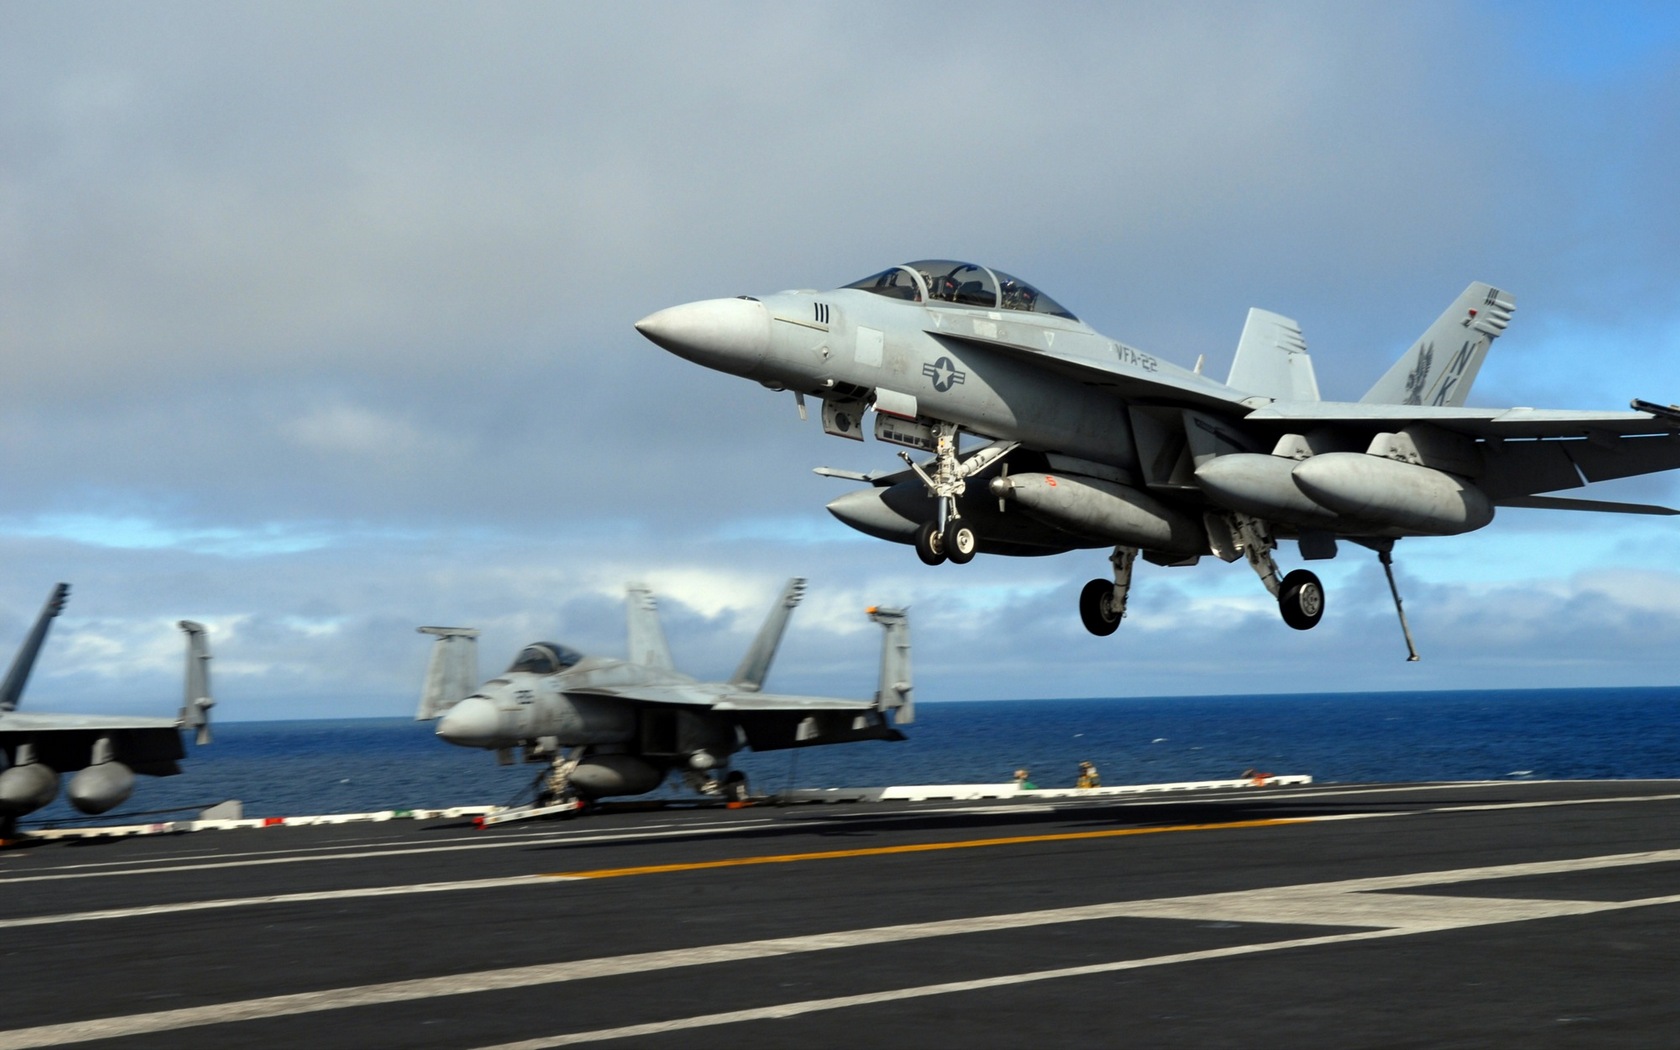 Download full size F-18 Hornet Military Airplanes wallpaper / 1680x1050